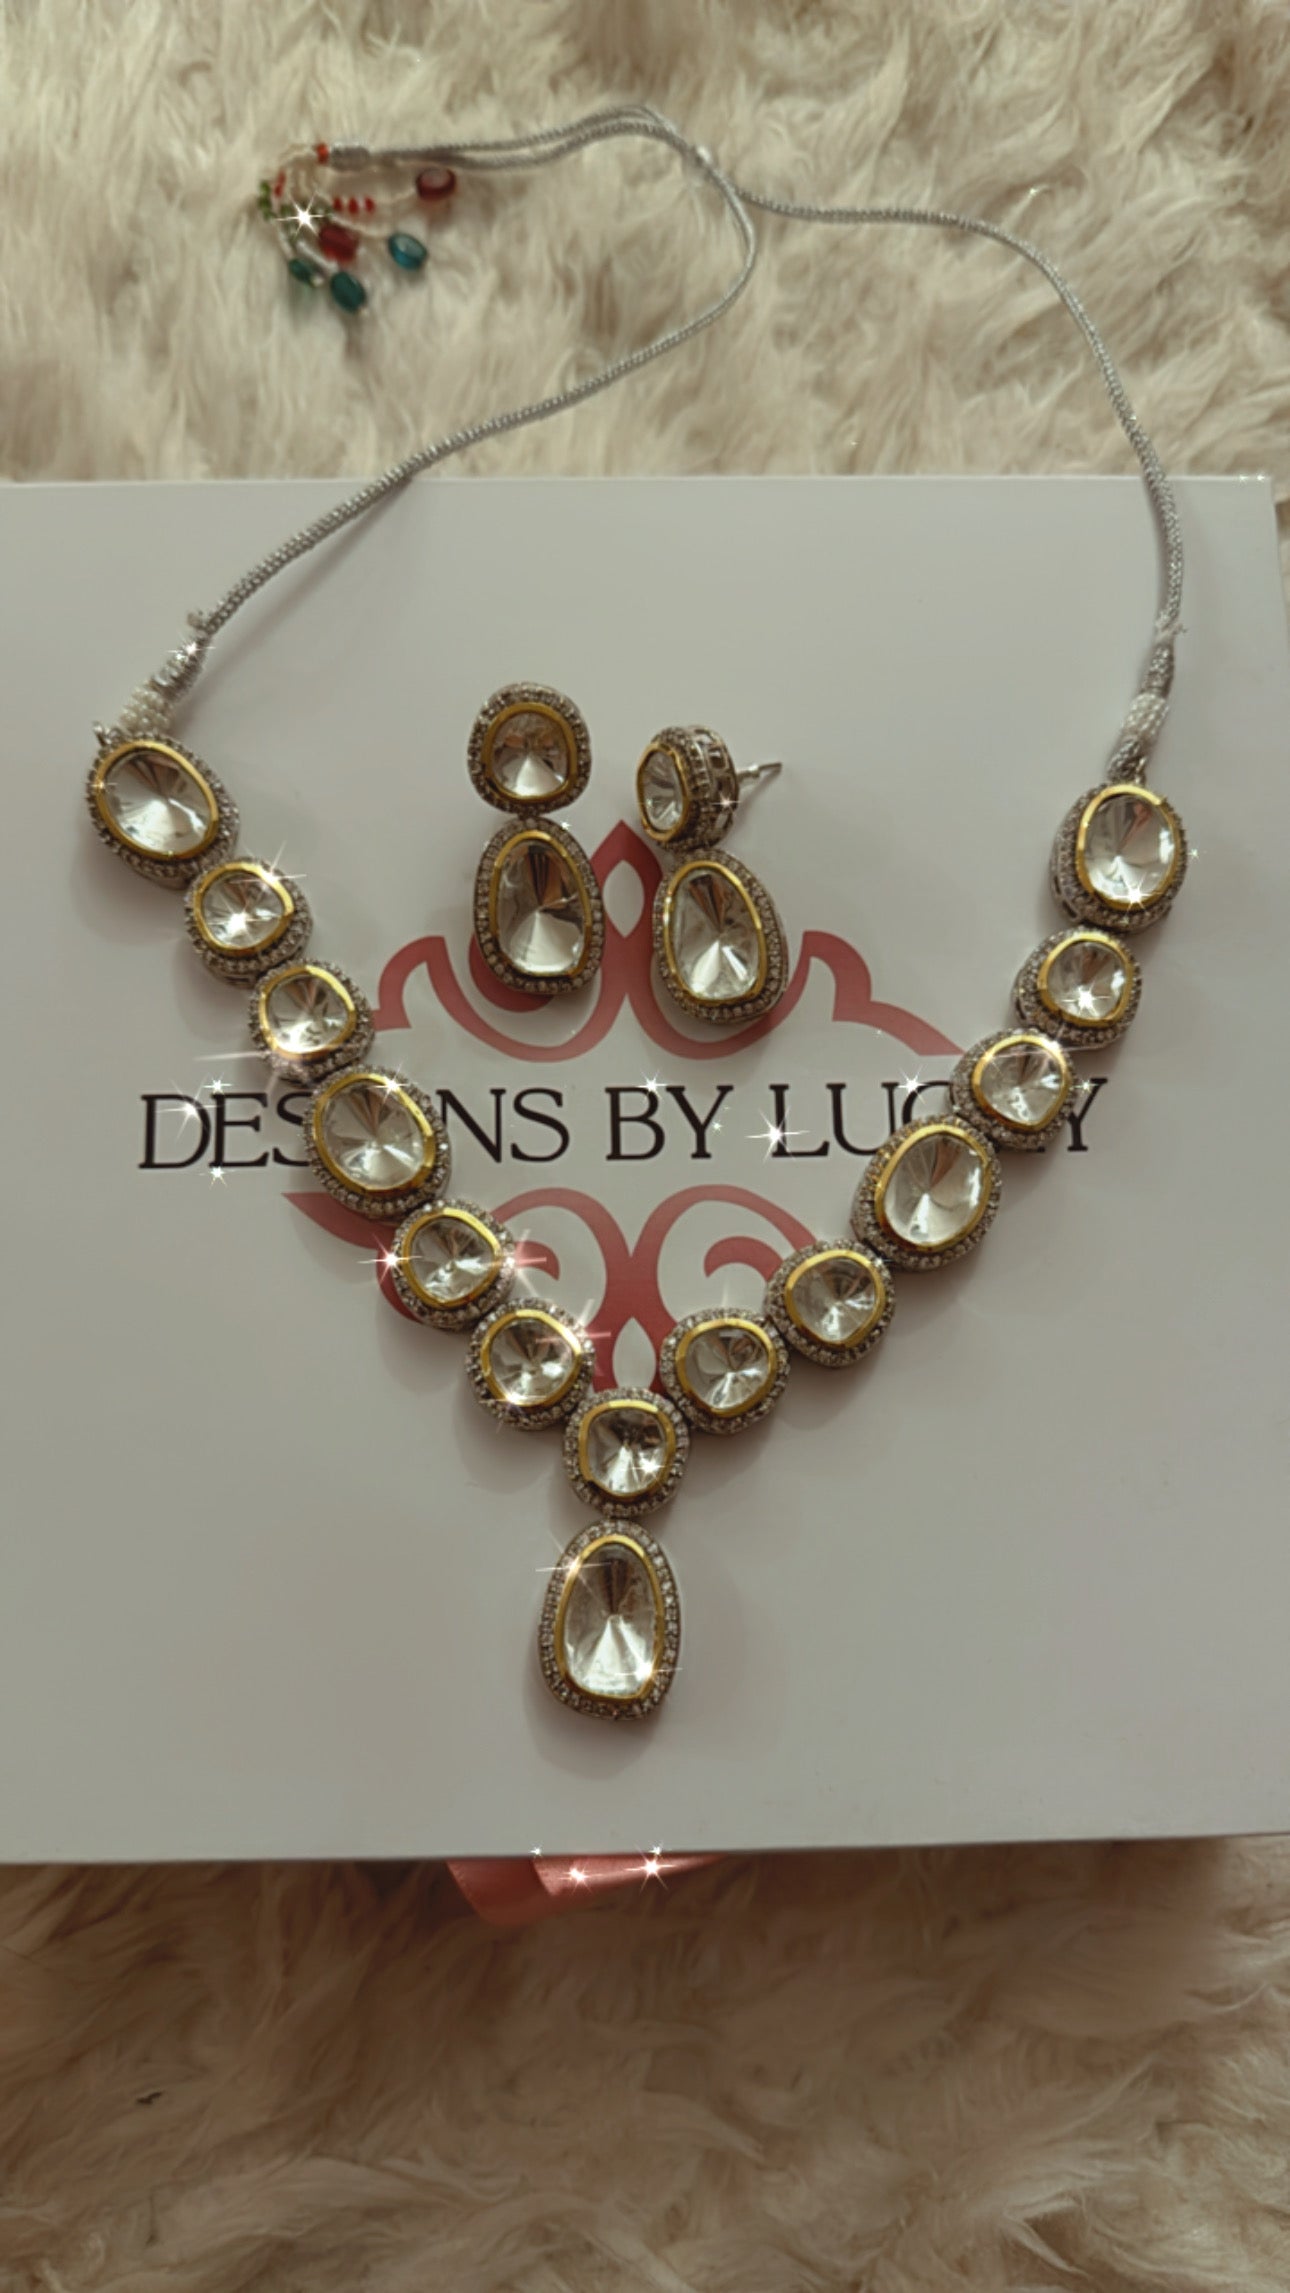 Dianna necklace set (preorder - ships in 4-6 weeks